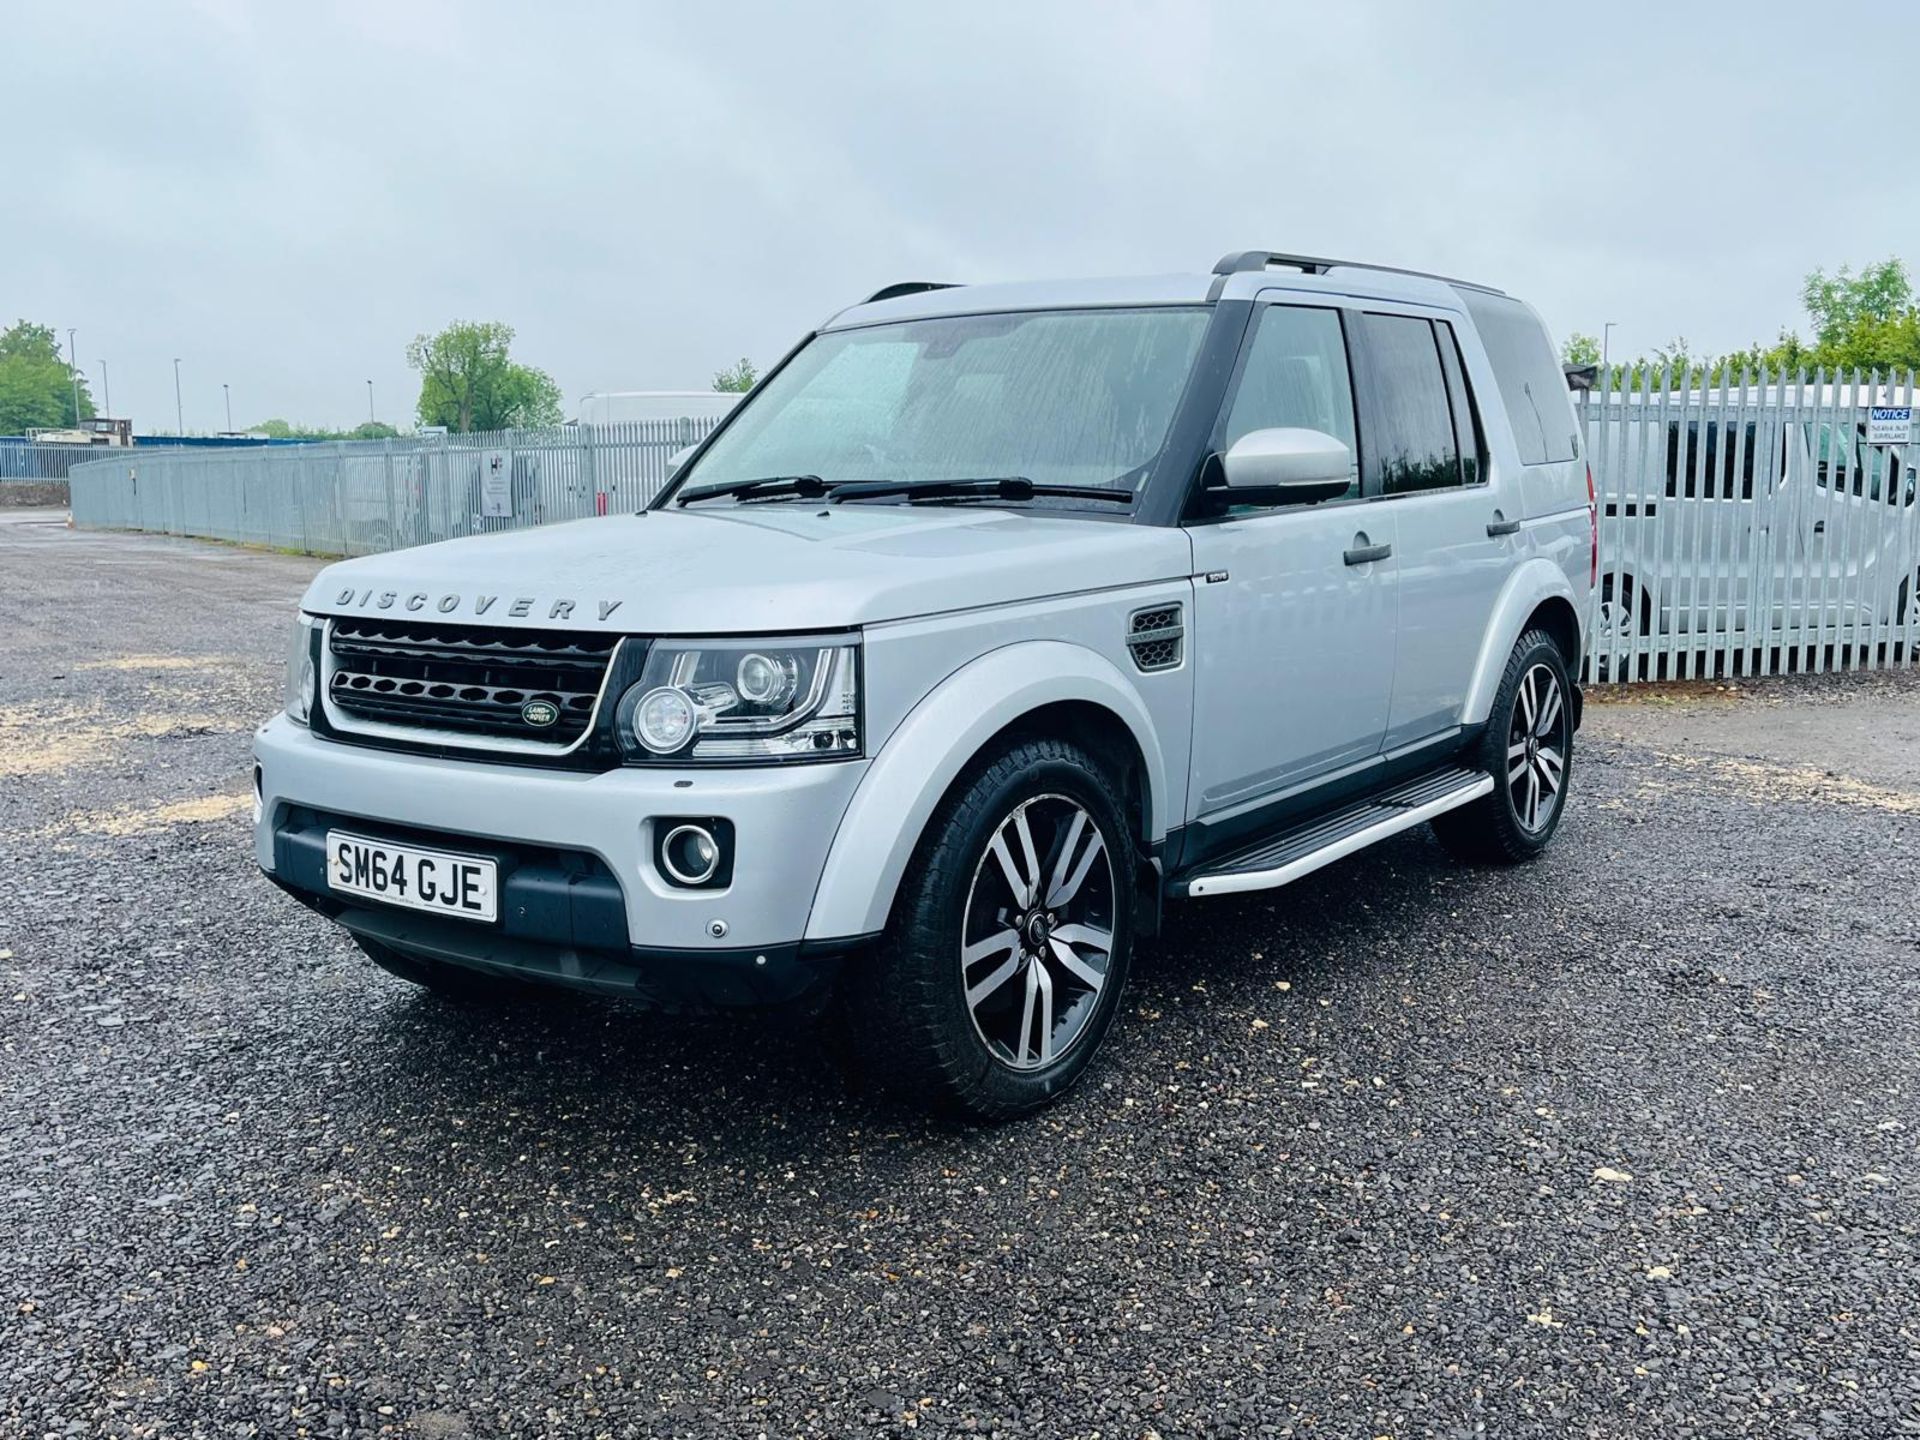 ** ON SALE ** Land Rover Discovery 4 3.0 SD V6 255 2014 '64 Reg' - A/C - Alloy Wheels - Tow Bar - Image 3 of 30